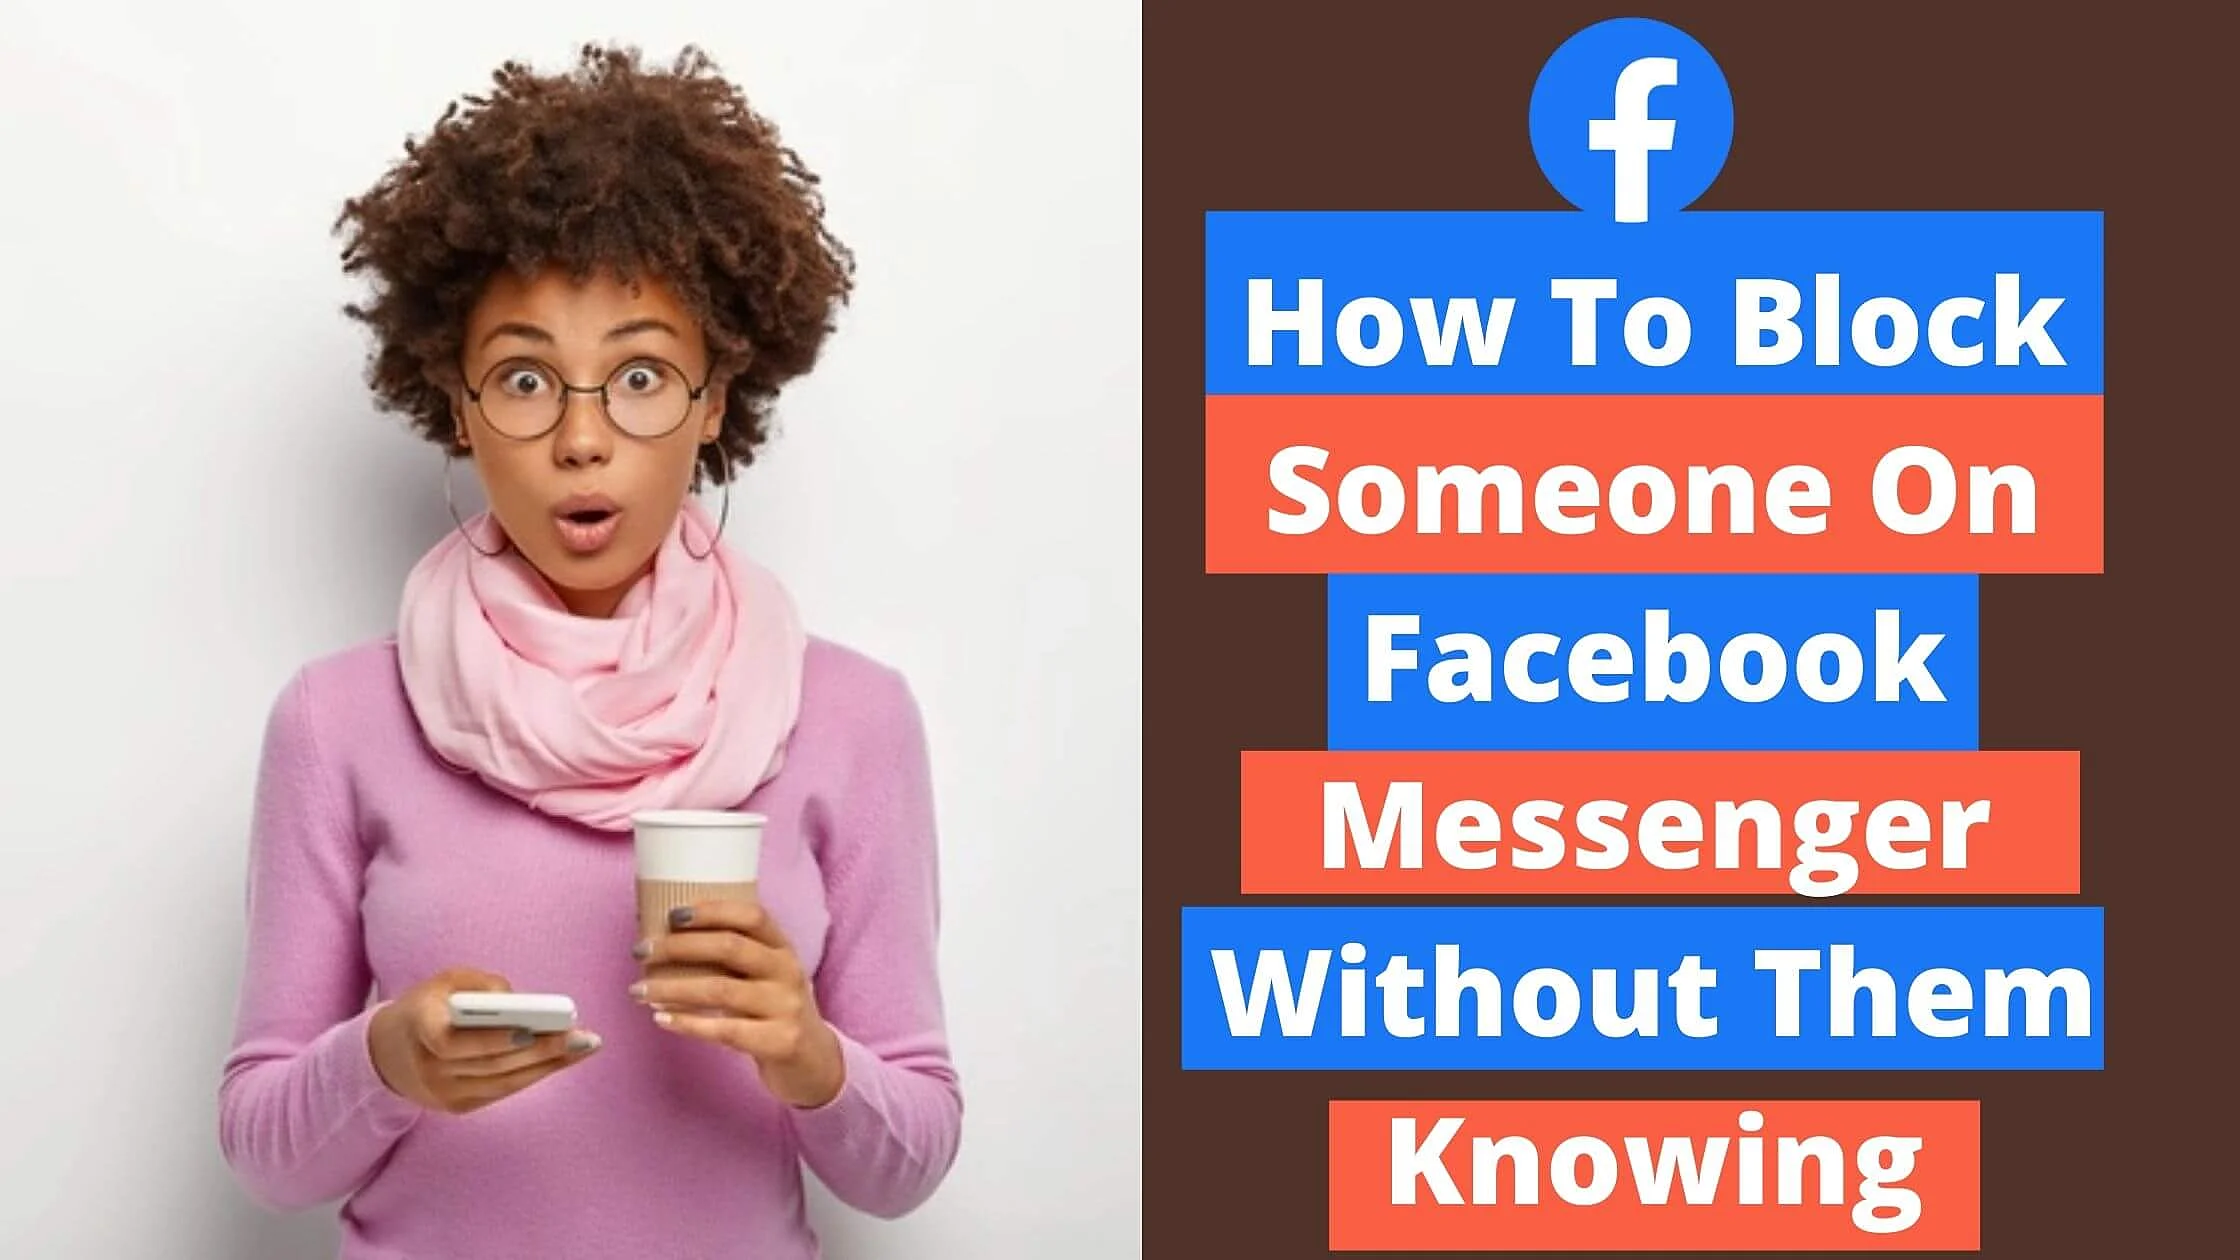 How To Block Someone On Facebook Messenger Without Them Knowing